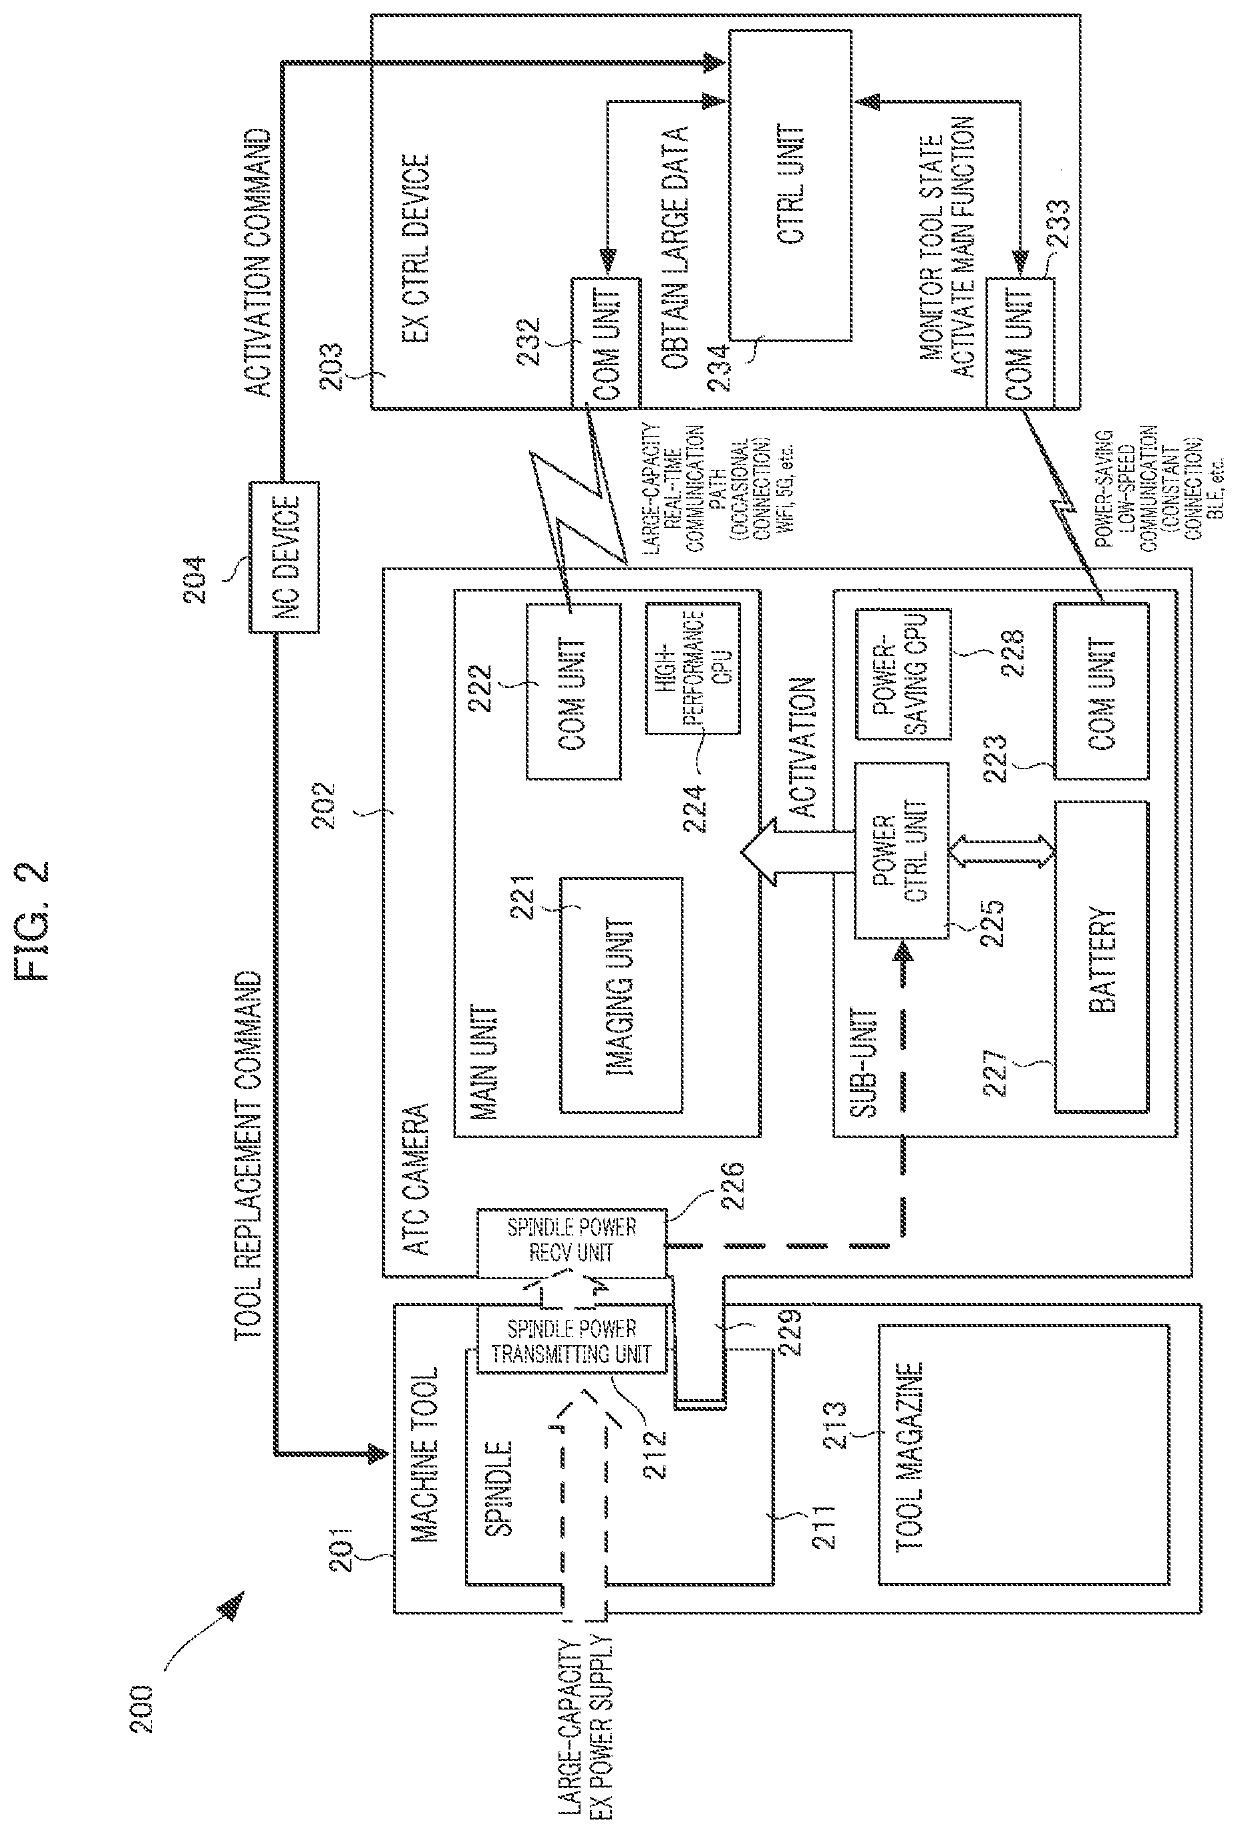 Device for machine tool